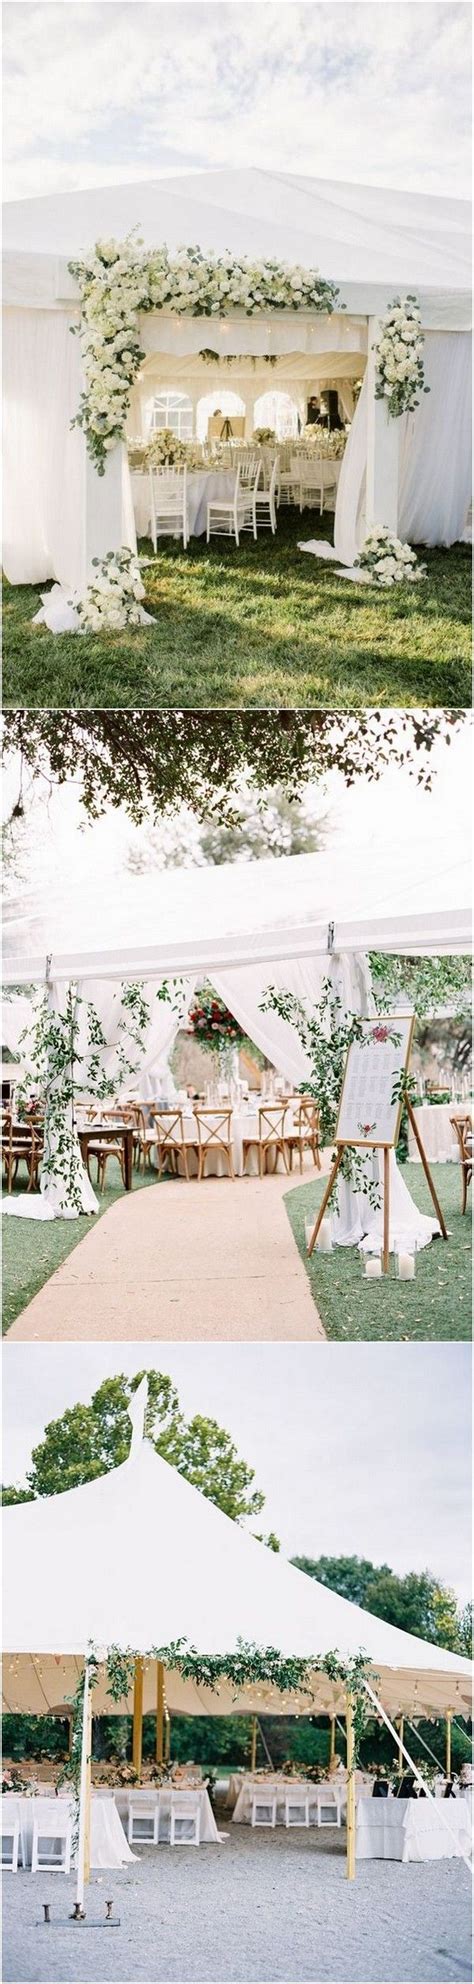 16 Gorgeous Wedding Entrance Decoration Ideas For Outdoor